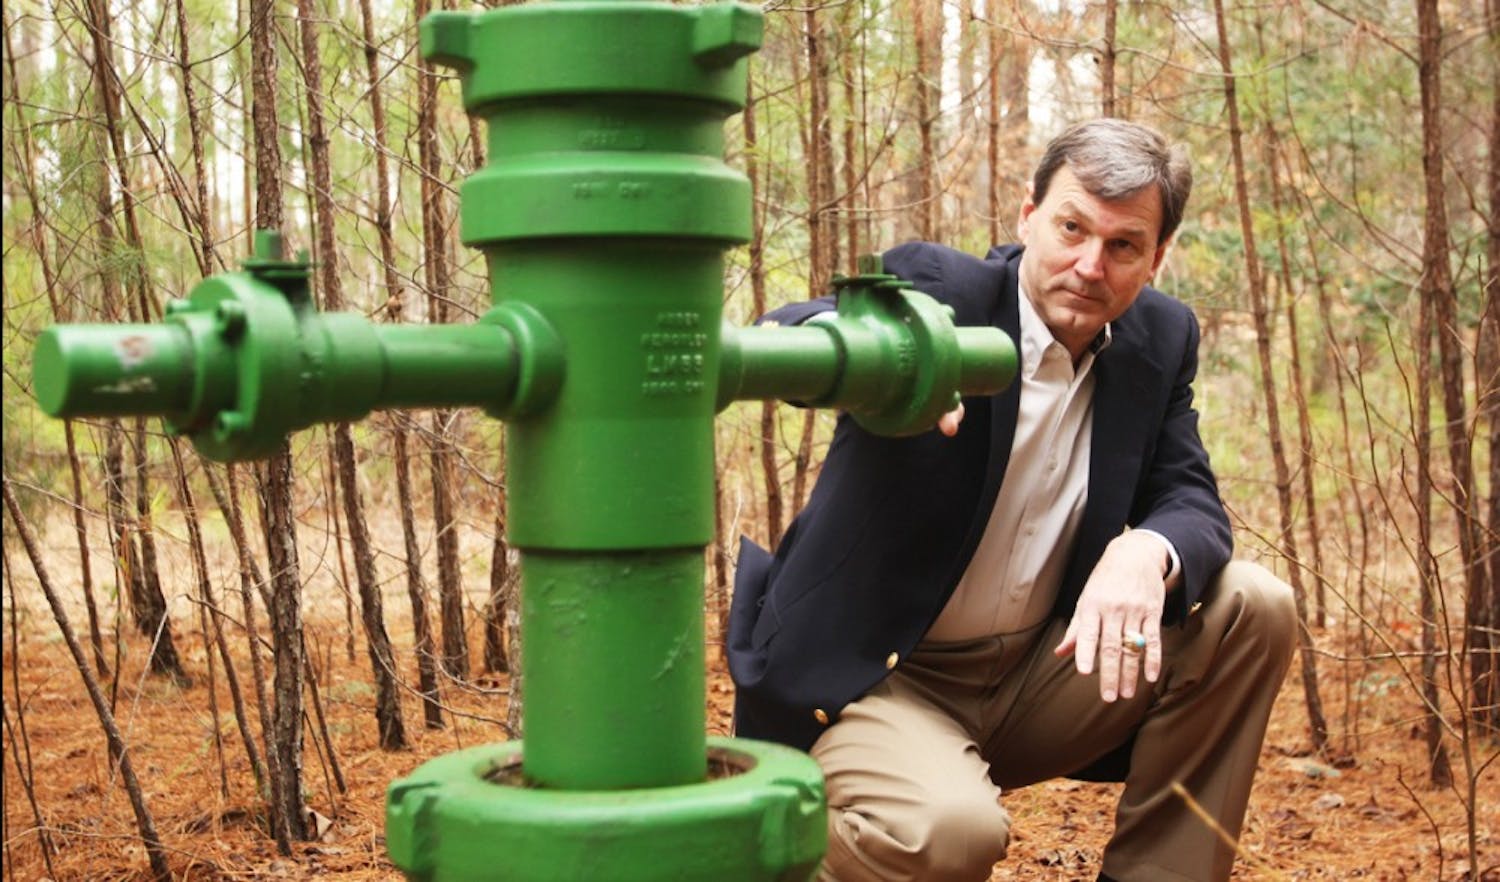 	Lee County Commissioner and Mining and Energy Commission Chairman Jim Womack examines a gas well near Chatham County.